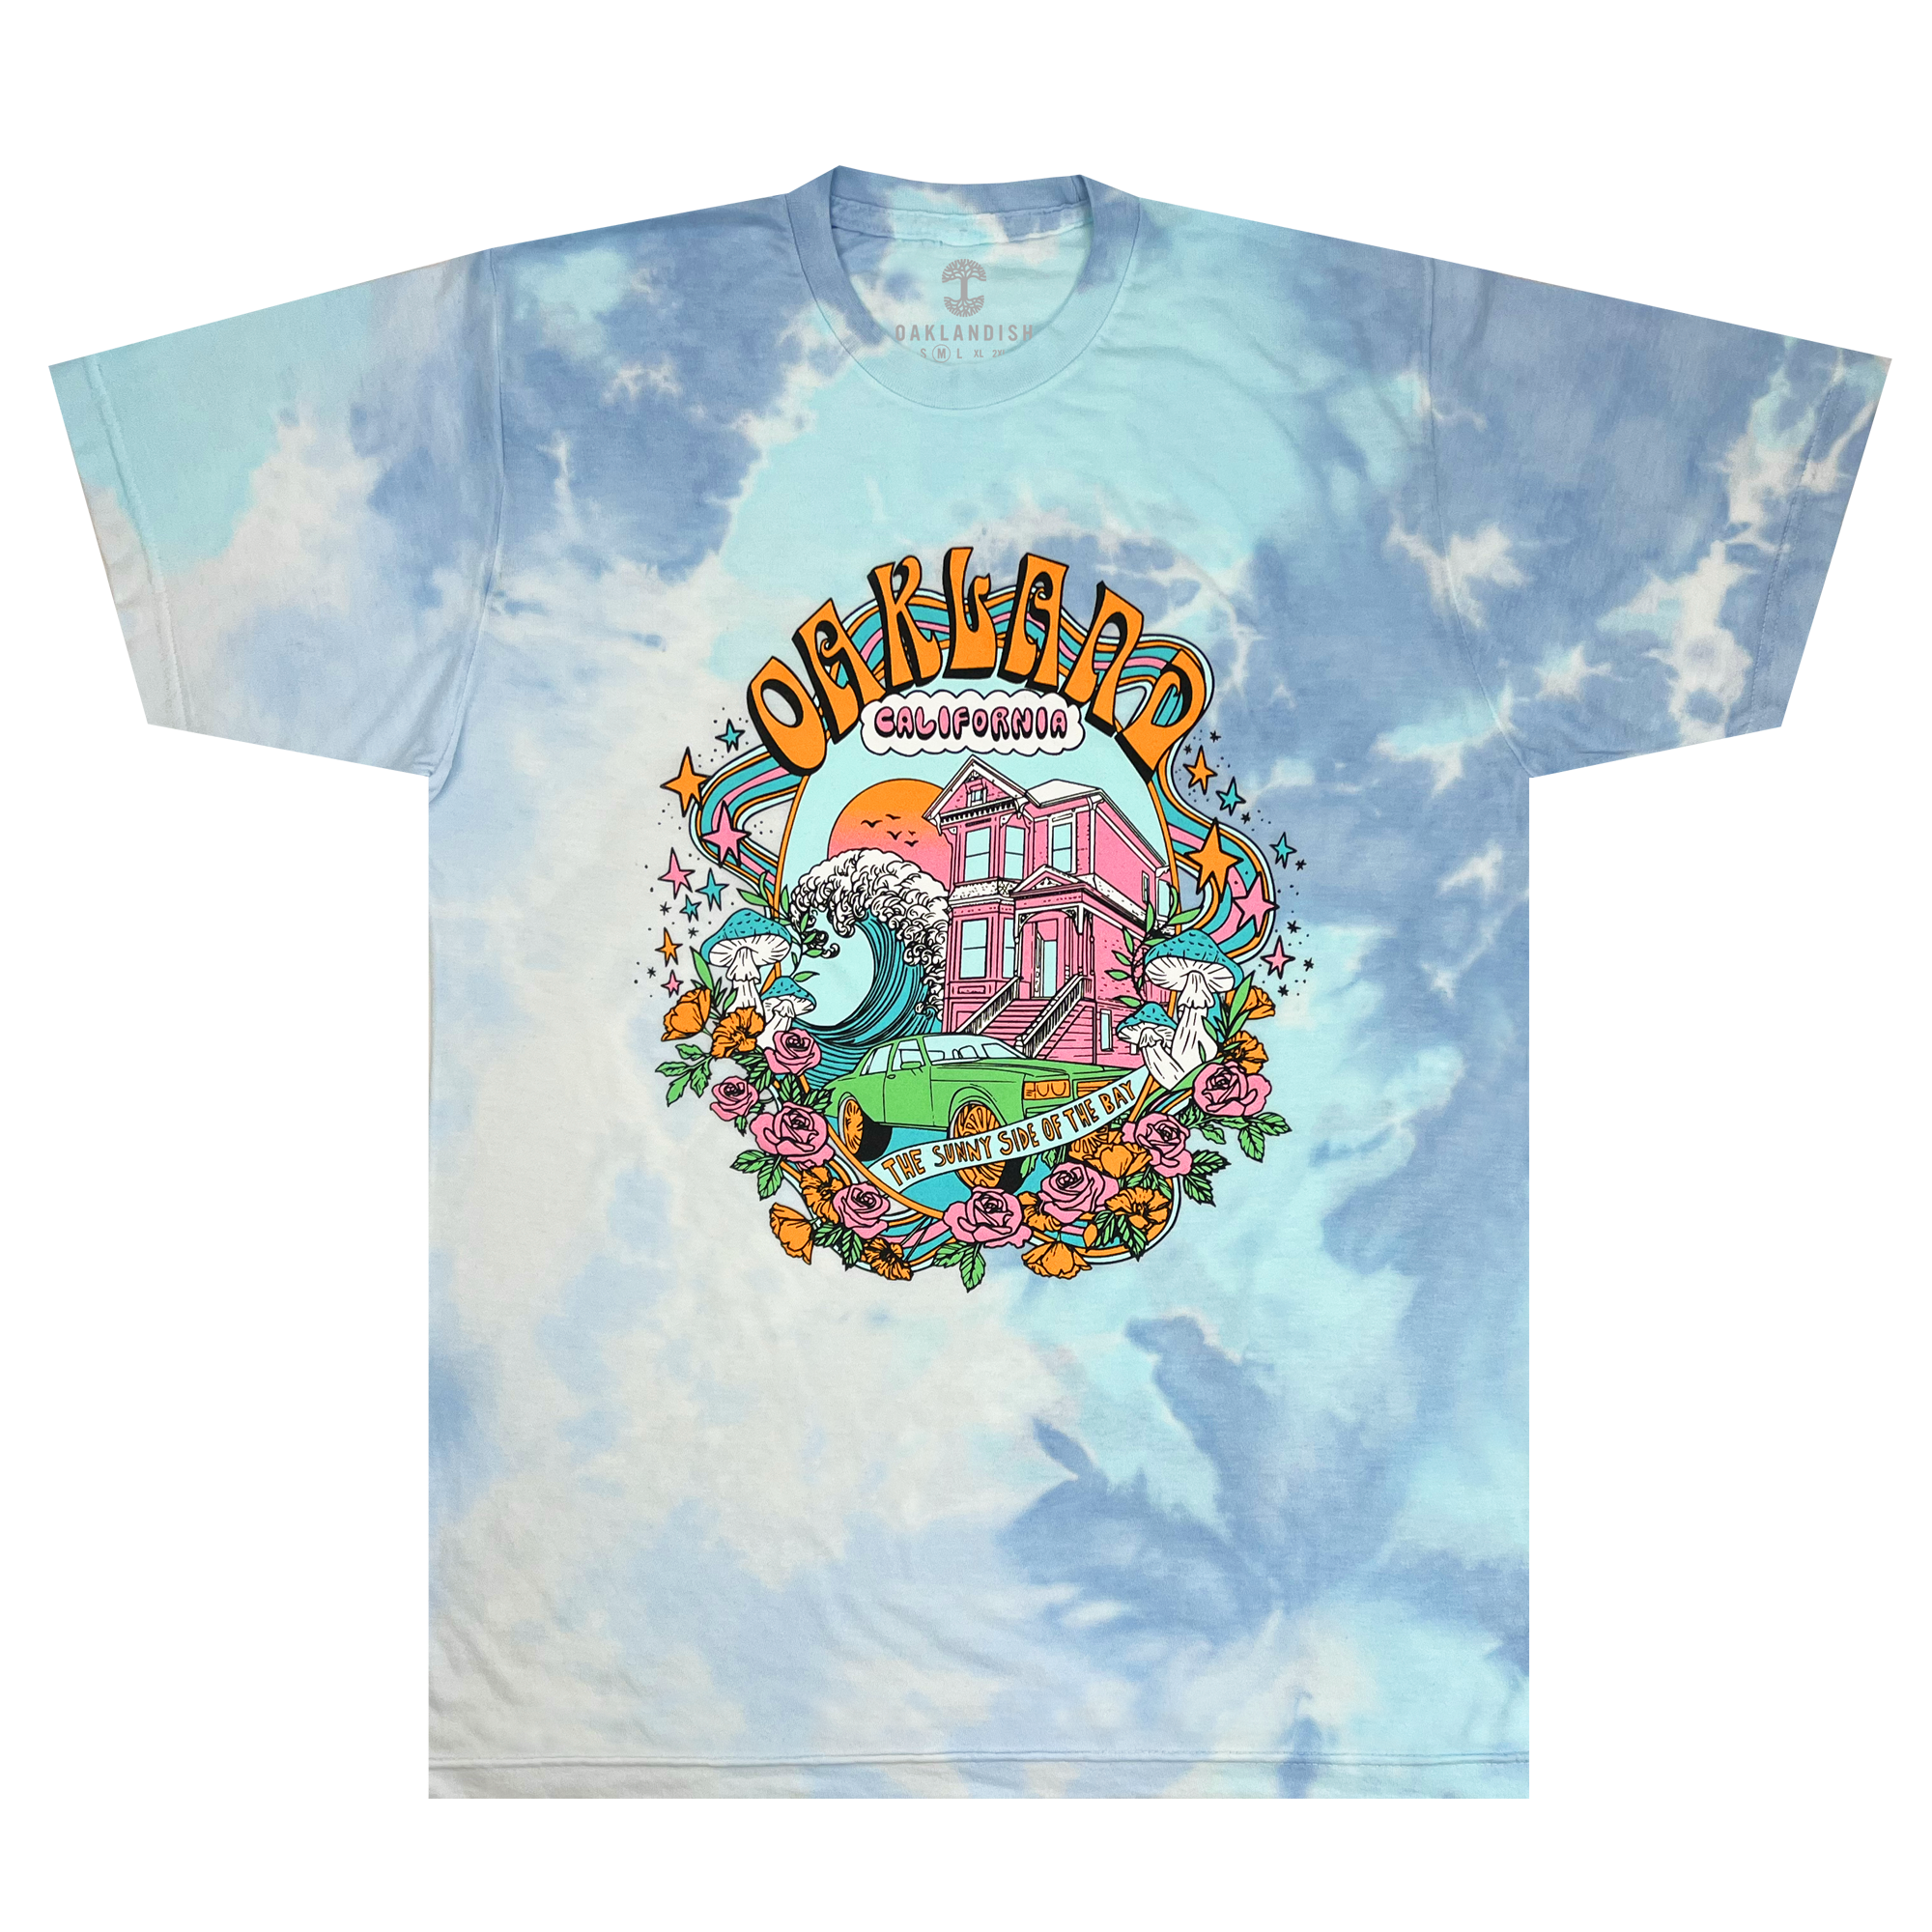 T-shirt with multiple tones of blue in tie-dye with full-color dream scape graphic with Oakland, California, Sunny Side of the Bay wordmark. 